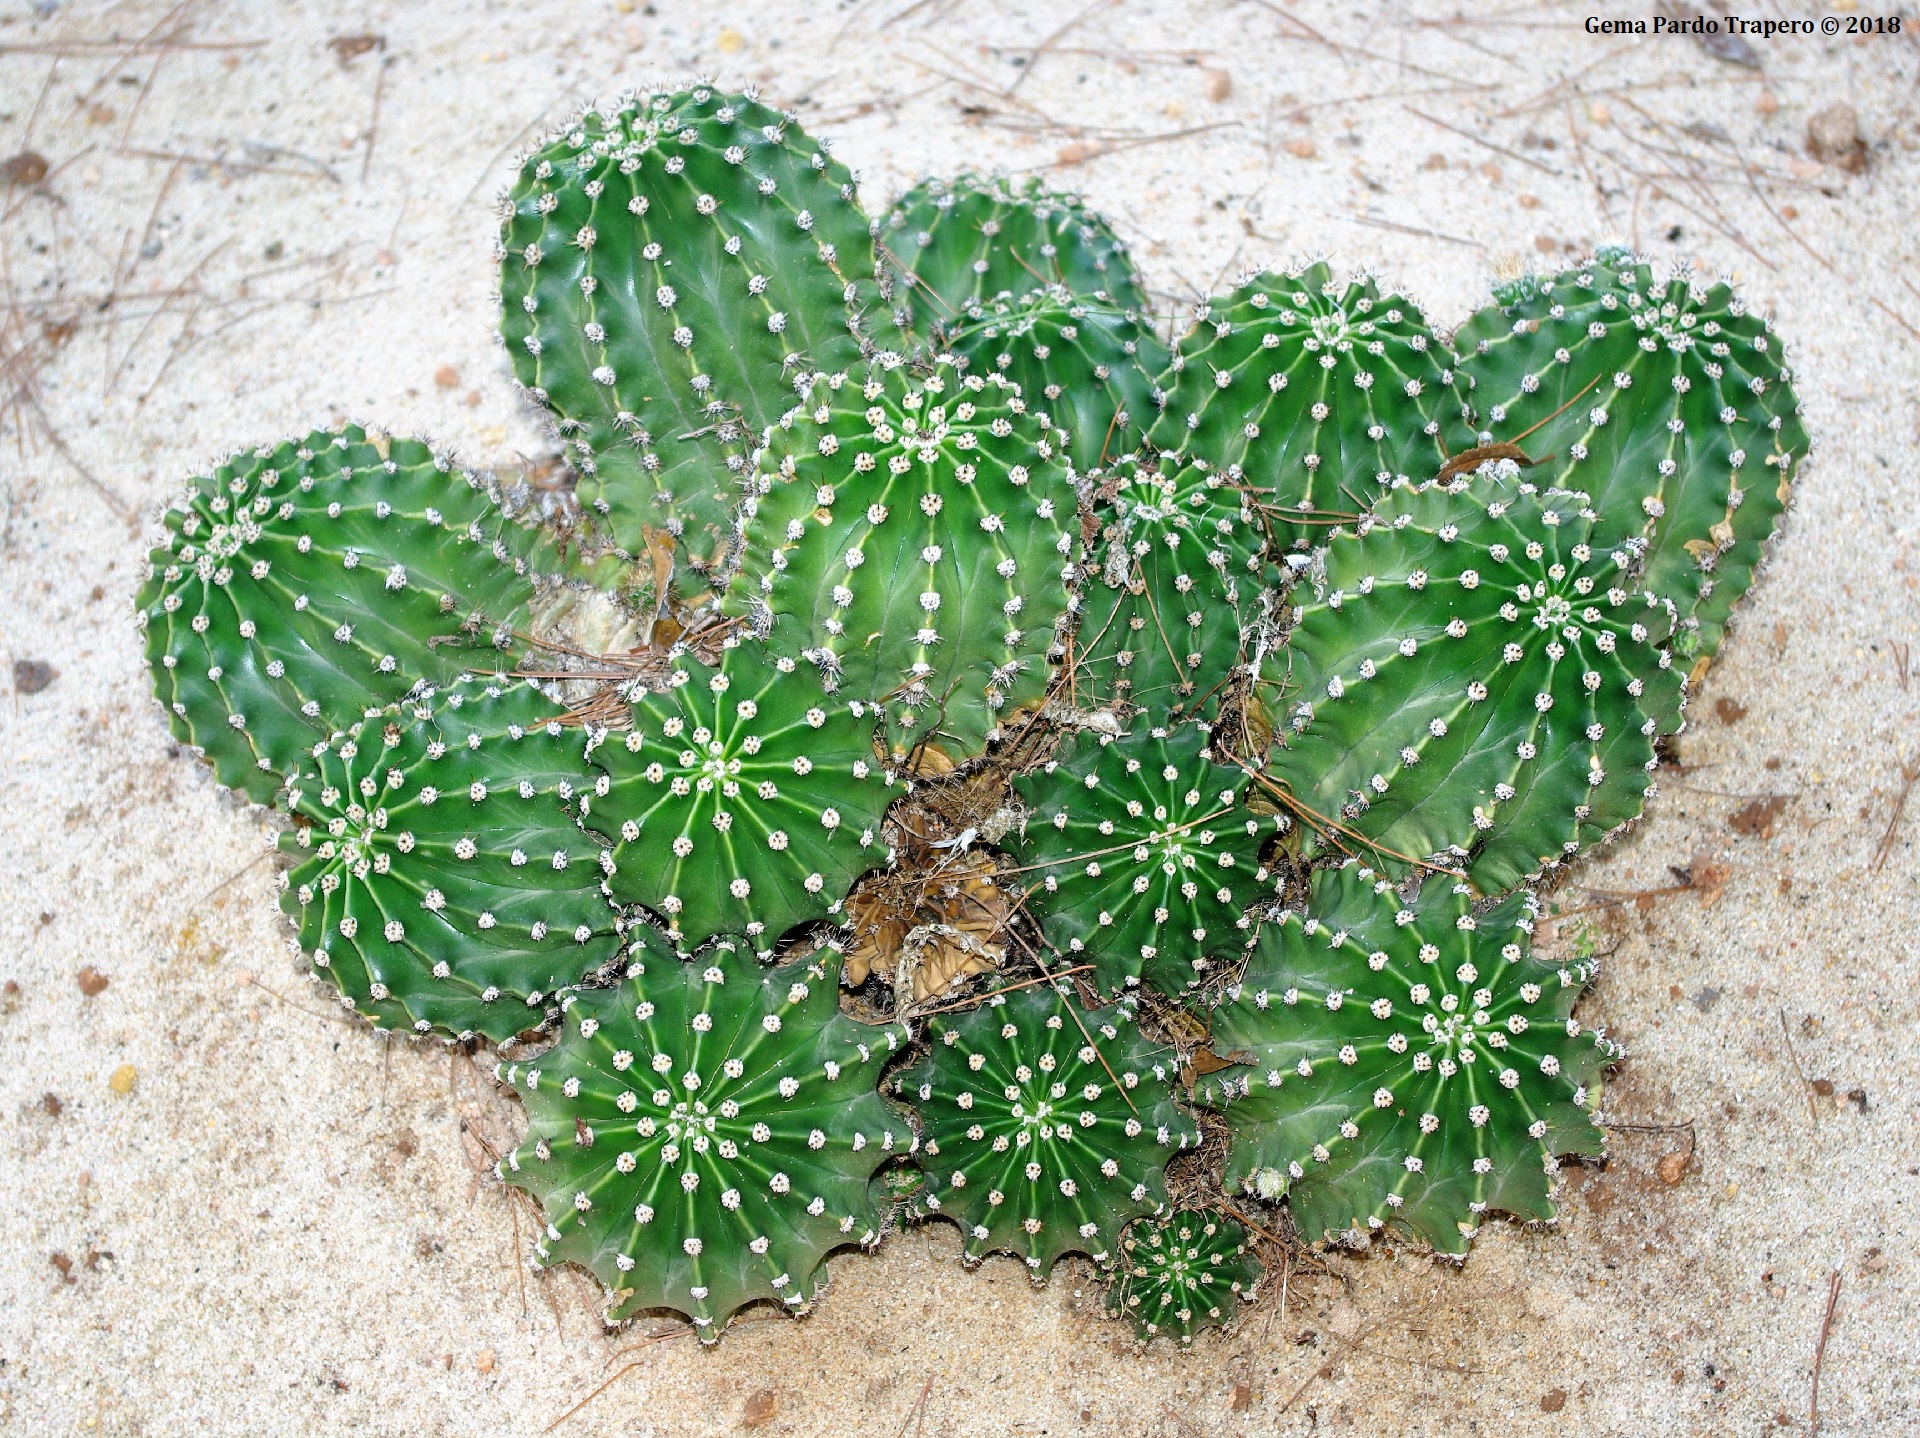 Earth Cactus HD Wallpaper | Background Image